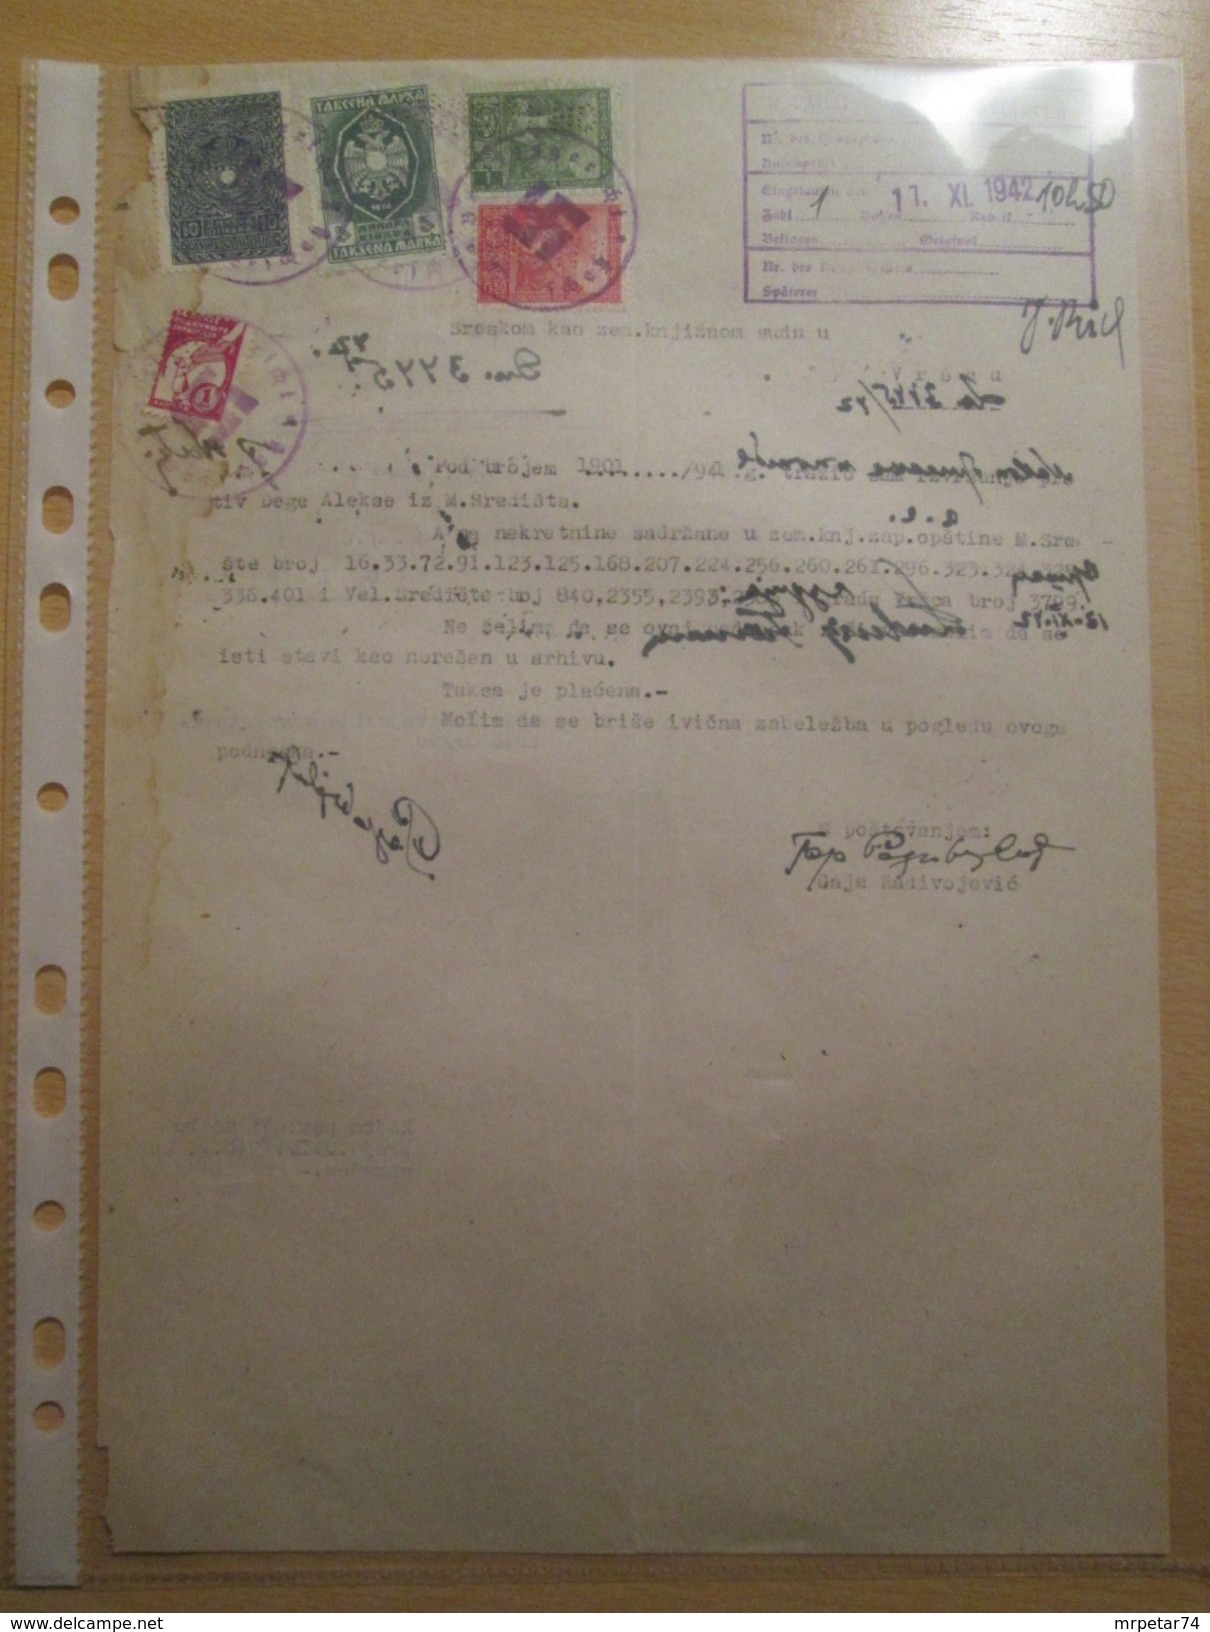 WWII German Third Reich Documents & Stamps in Occupied Serbia